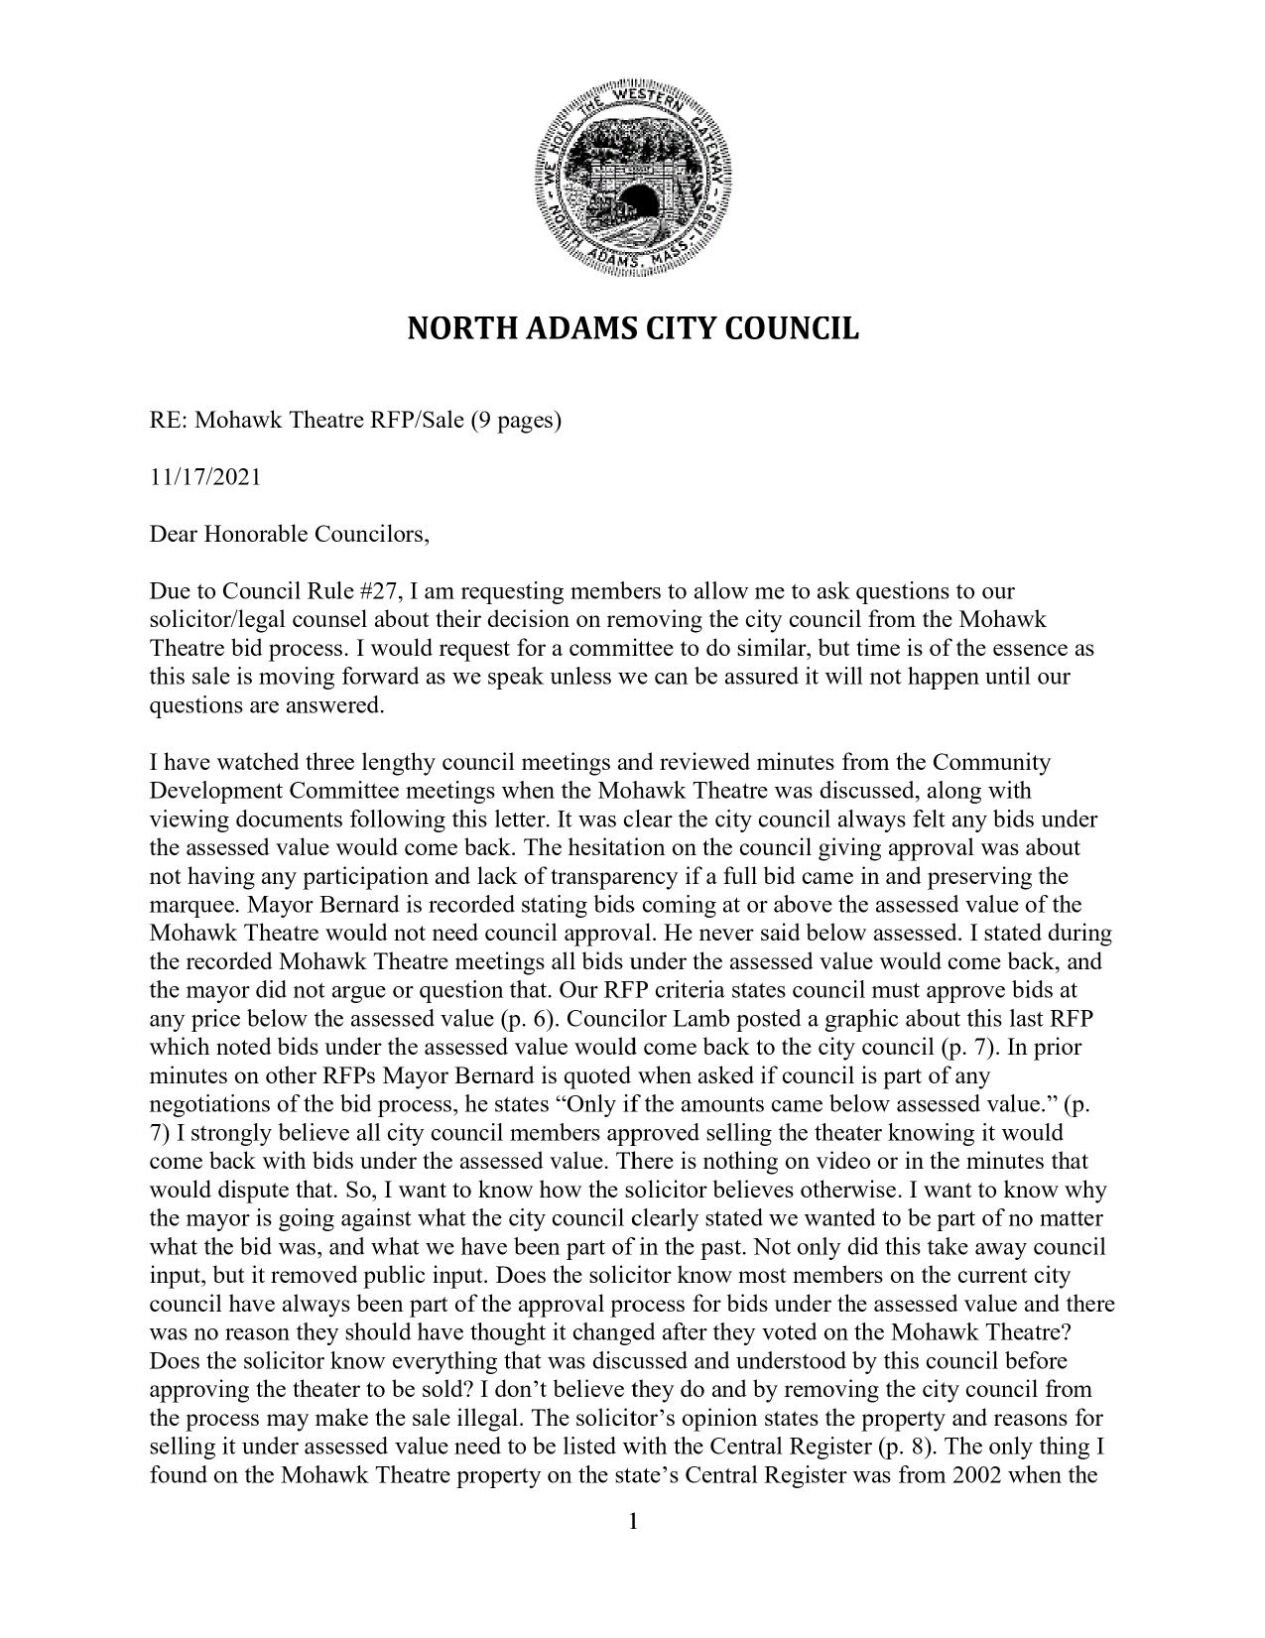 Keith Bona's letter to city council